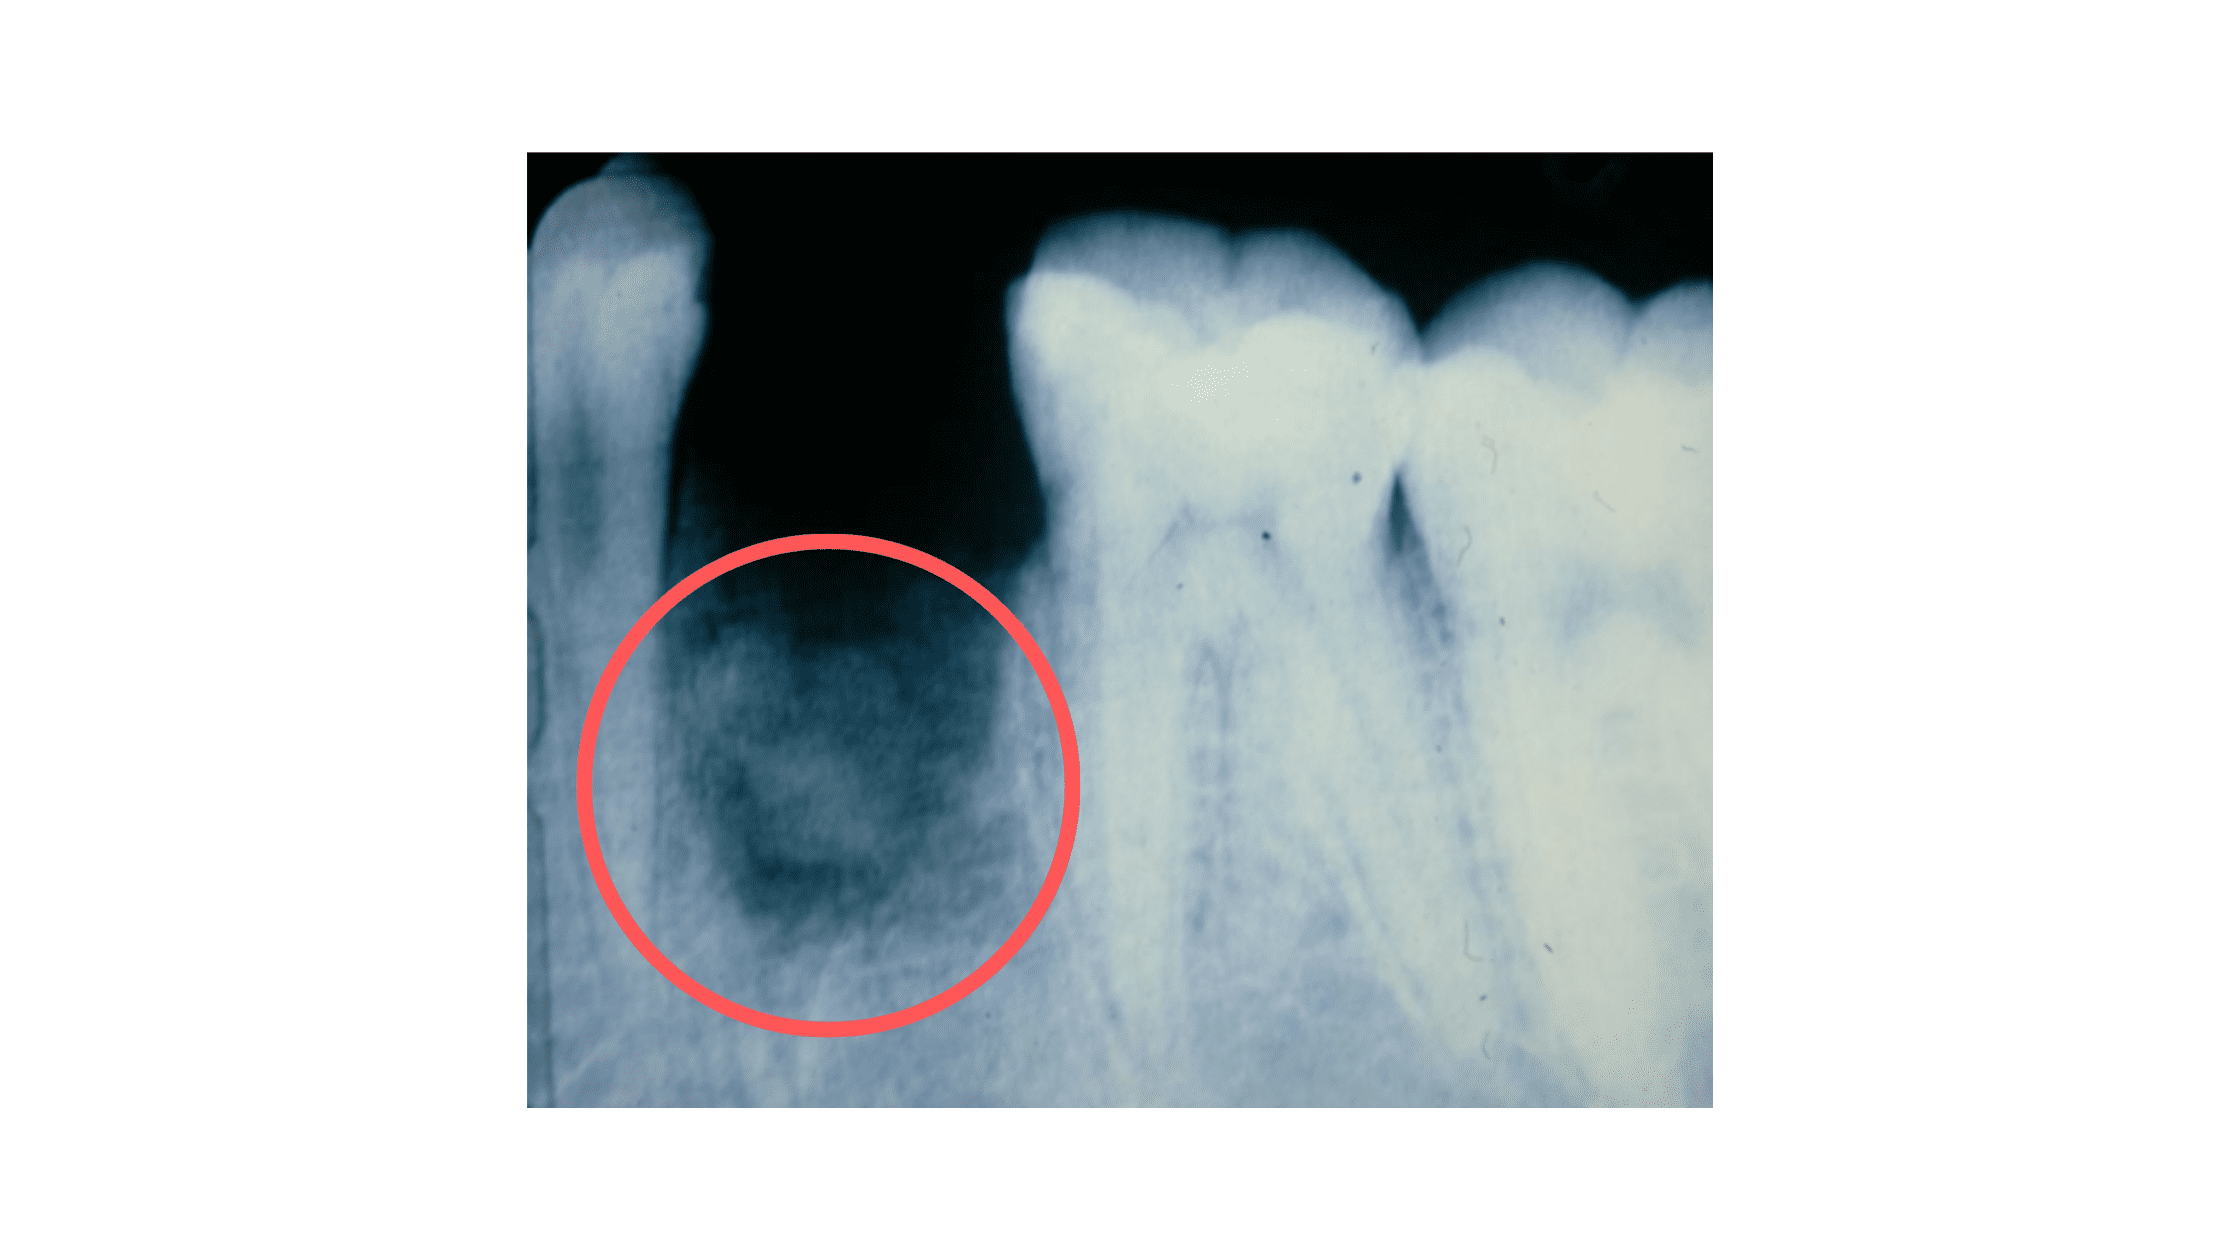 How does dry socket appear on X-rays?